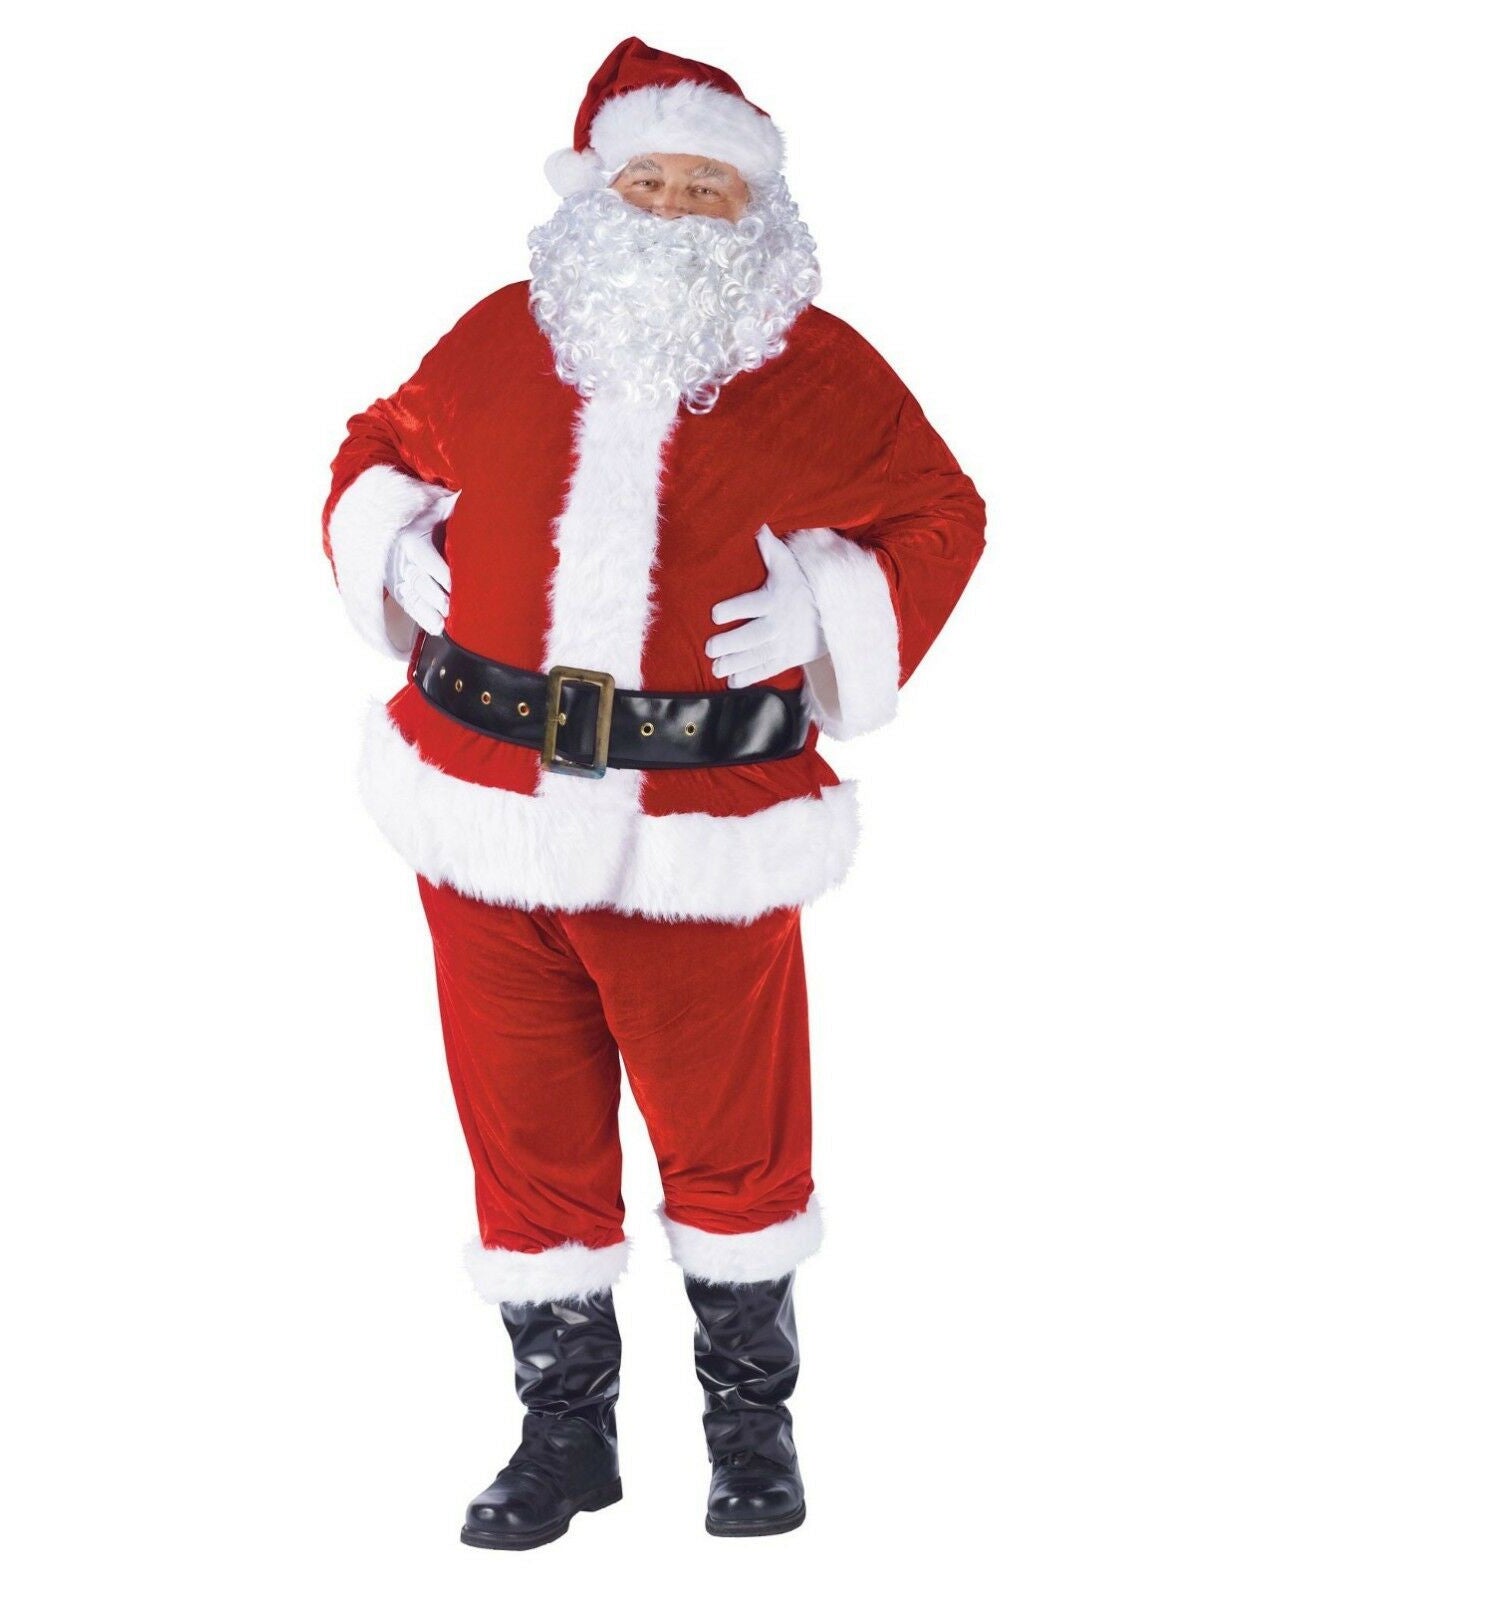 Complete Velour Santa Claus Suit Adult Costume Pull-over jacket top with back closure and belt loops Pants with side pockets Santa belt Boot tops White gloves Beard Santa hat with attached hair